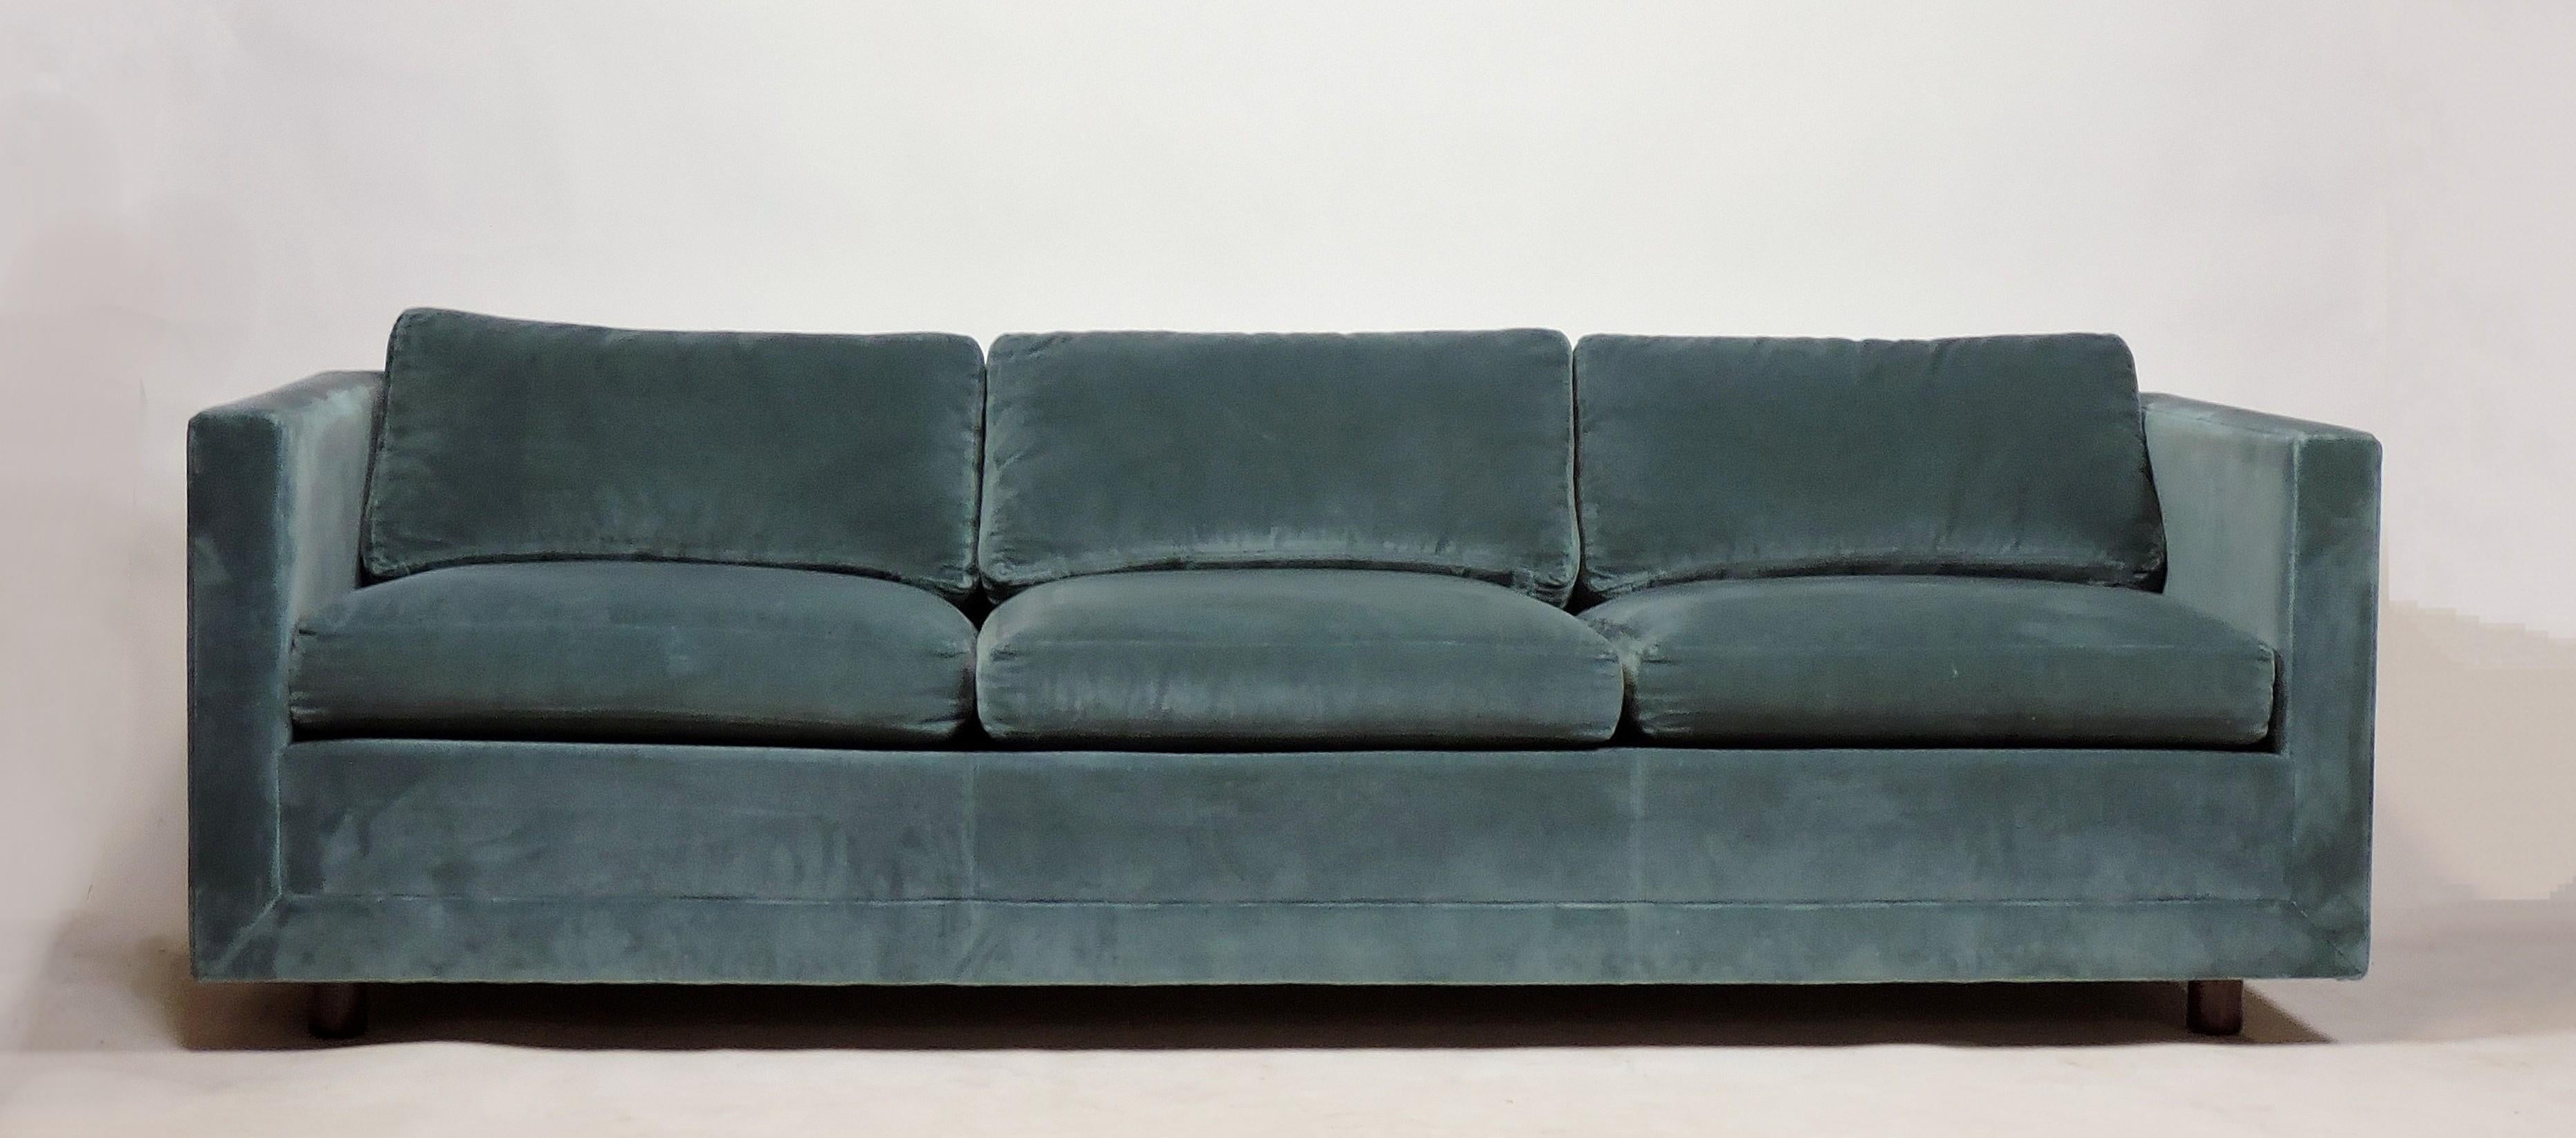 Beautiful and comfortable three-seat tuxedo sofa in the style of Edward Wormley or Harvey Probber. This sofa is upholstered in a teal color velvet and has three inch high wooden legs which give it a floating appearance. All of the cushions are